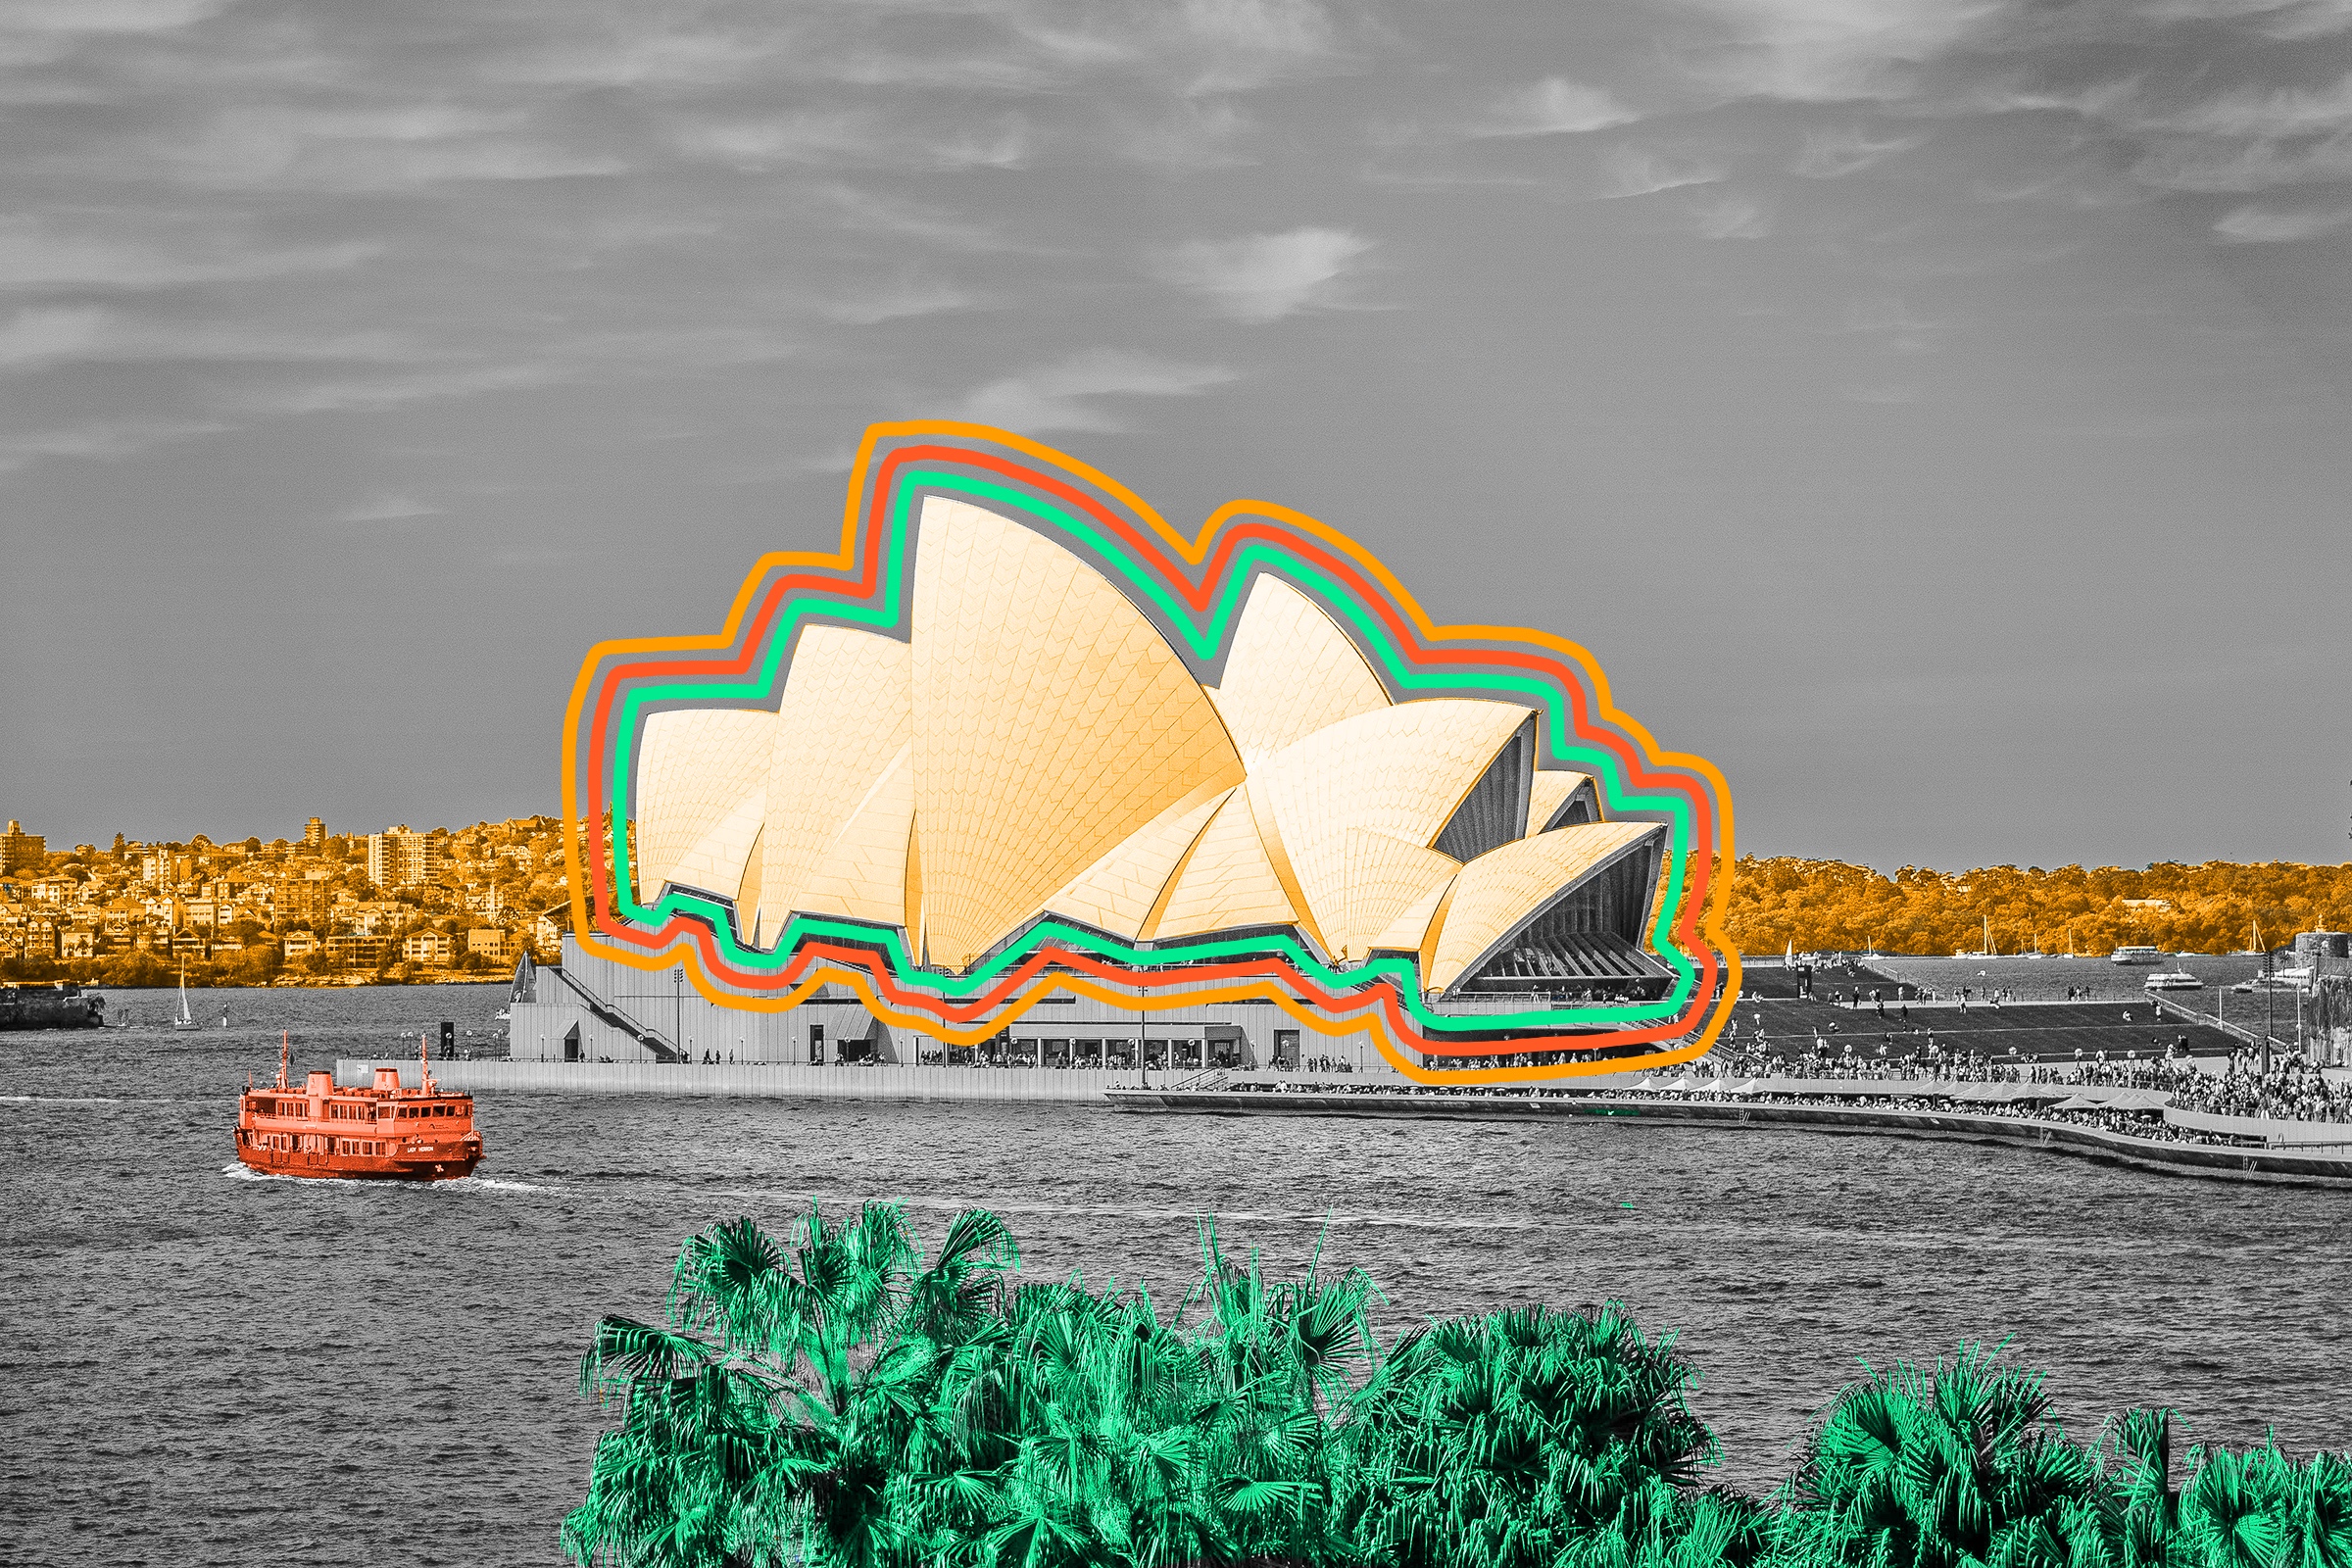 The Sydney Opera House was designed by a previously unknown architect.